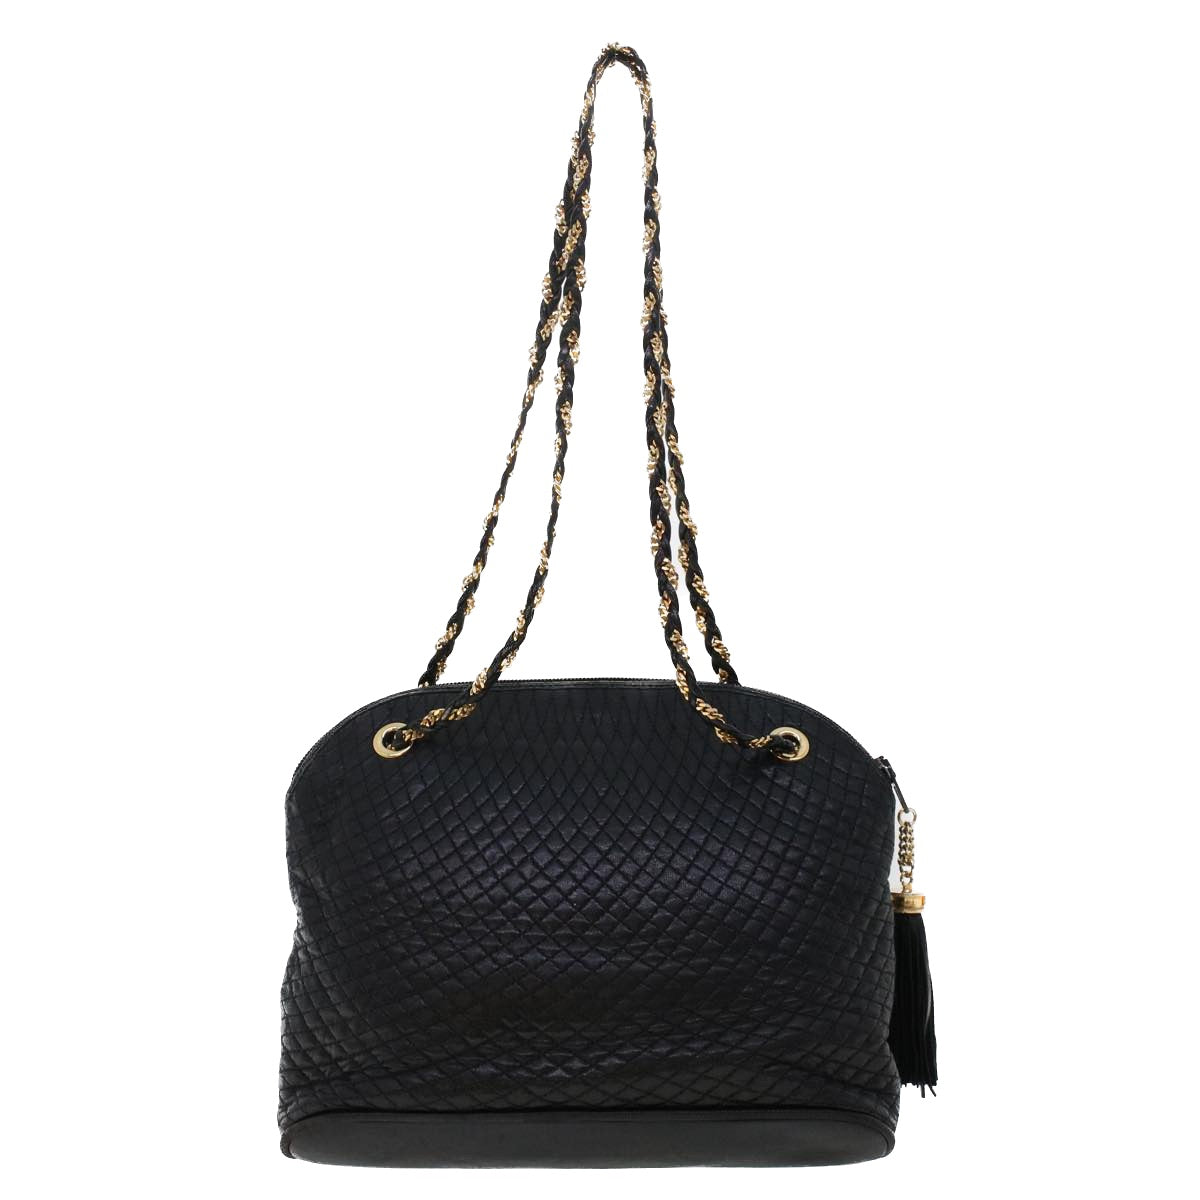 BALLY Chain Shoulder Bag Leather Black Auth bs6487